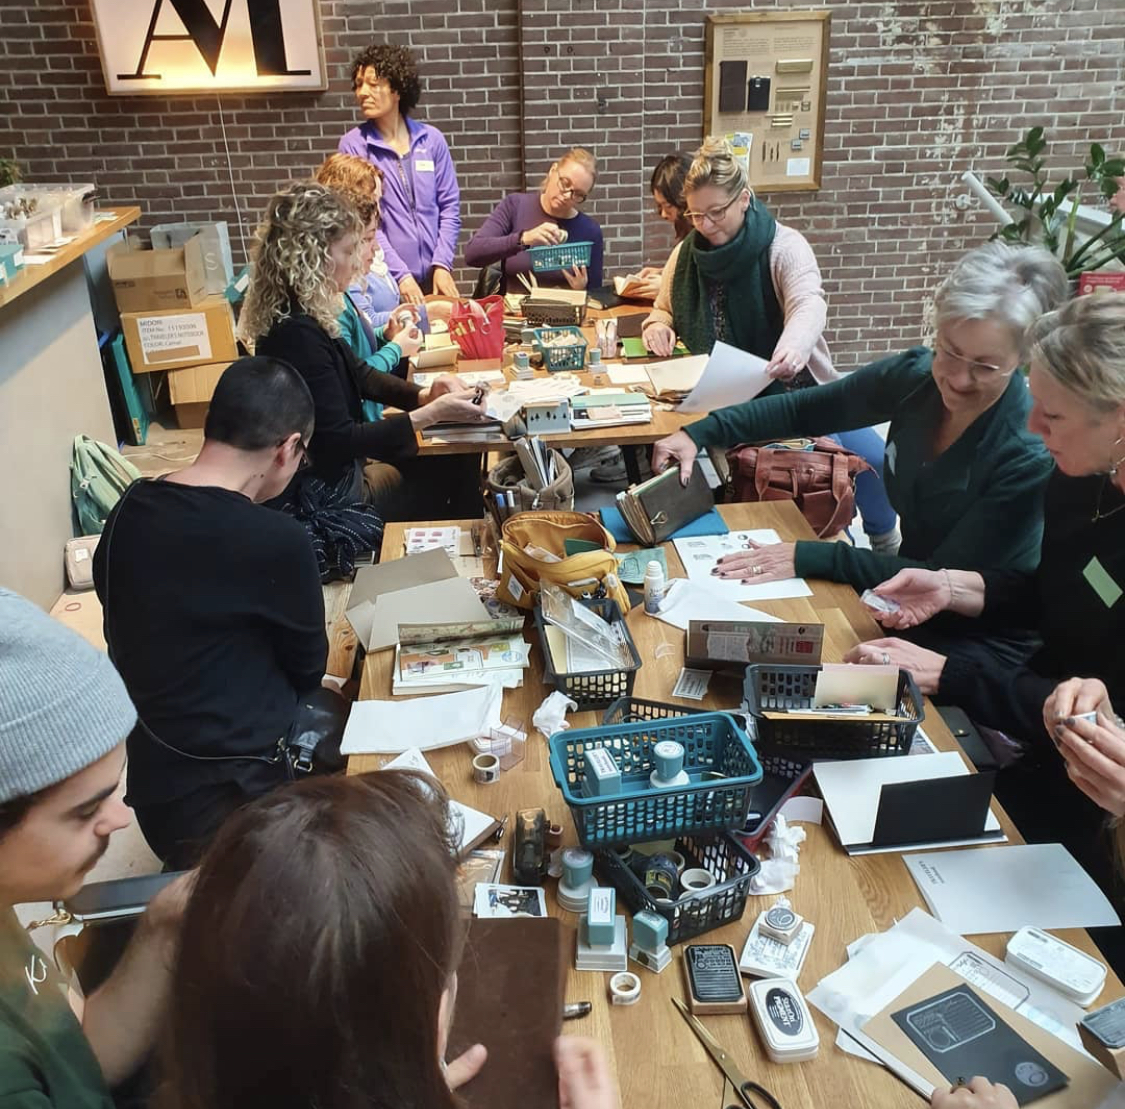 Journaling enthusiasts at Cafe Analog's Stationery Cafe